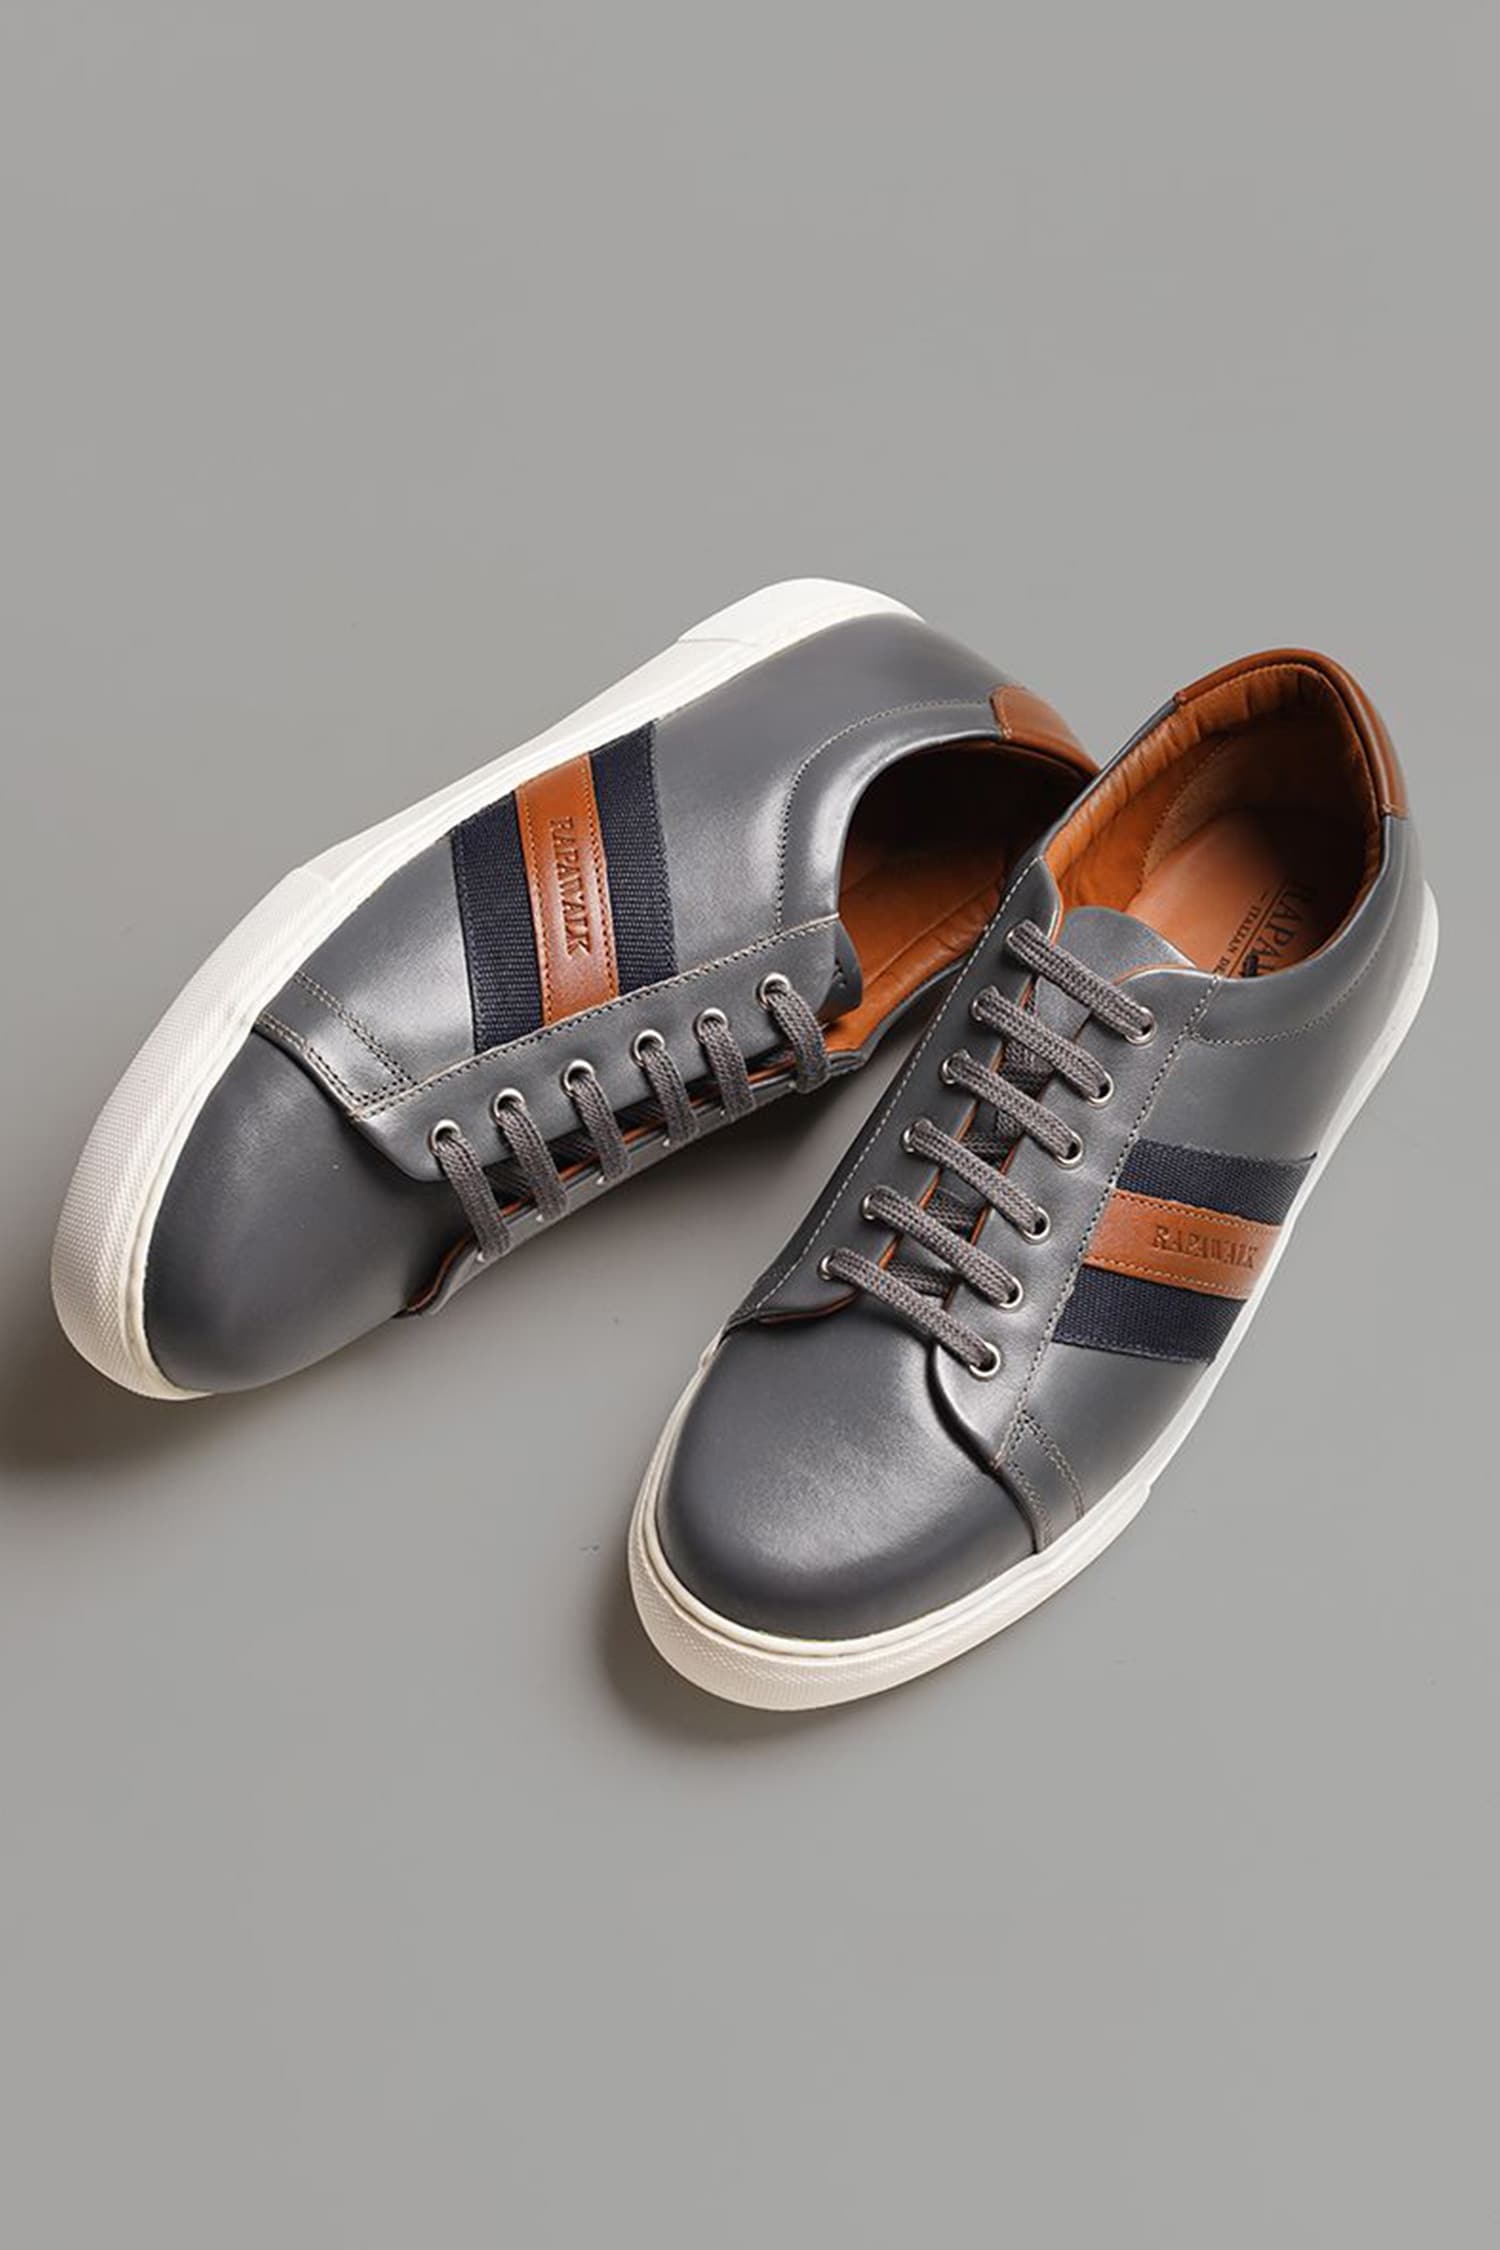 Buy Brown Striped Lace Up Leather Sneakers For Men by Rapawalk